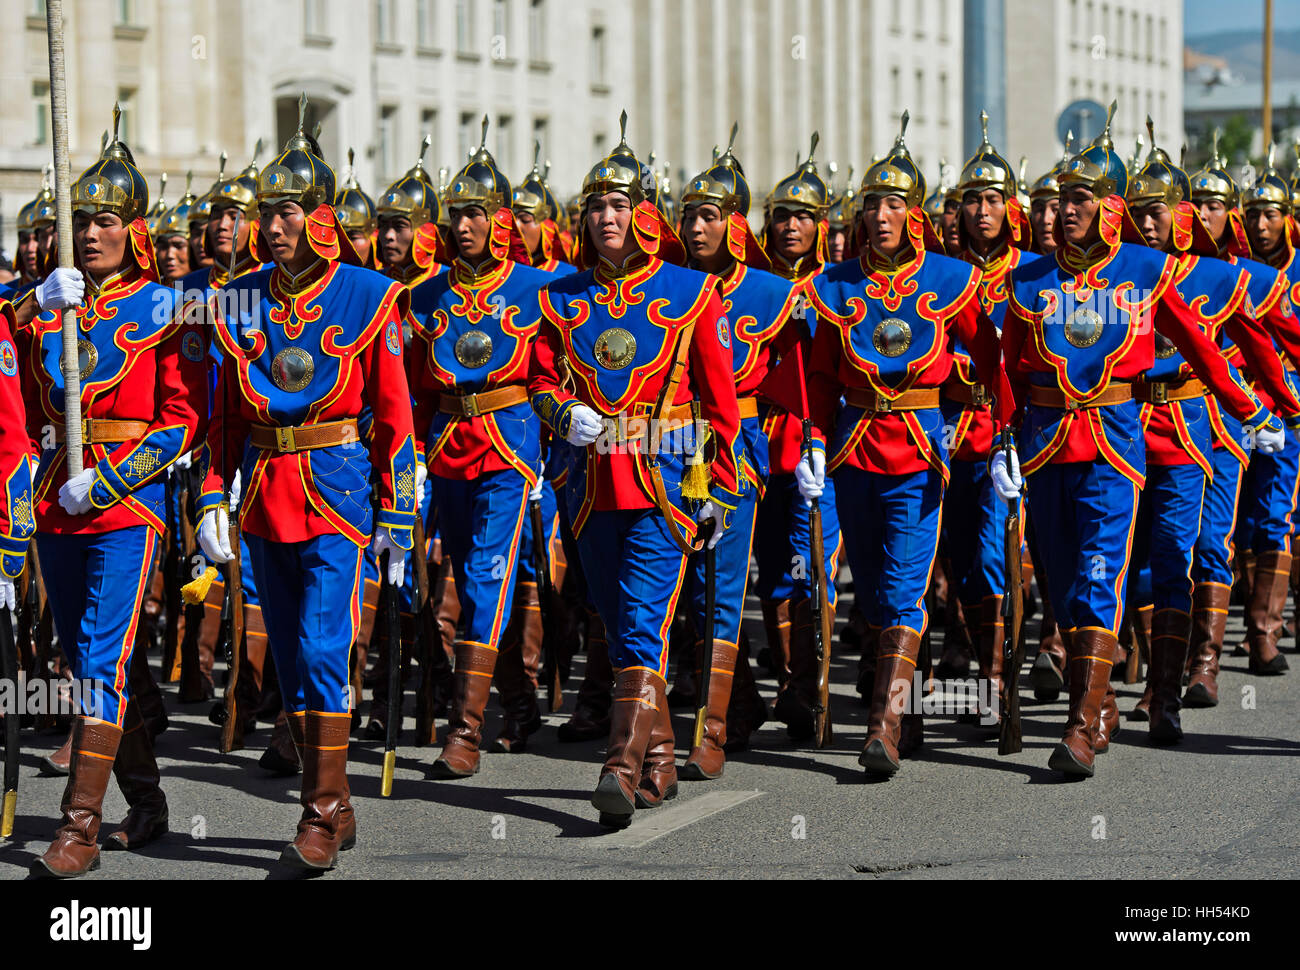 Parade of the Mongolian Armed Forces Honorary Guard in traditional uniform, Ulaanbaatar, Mongolia Stock Photo